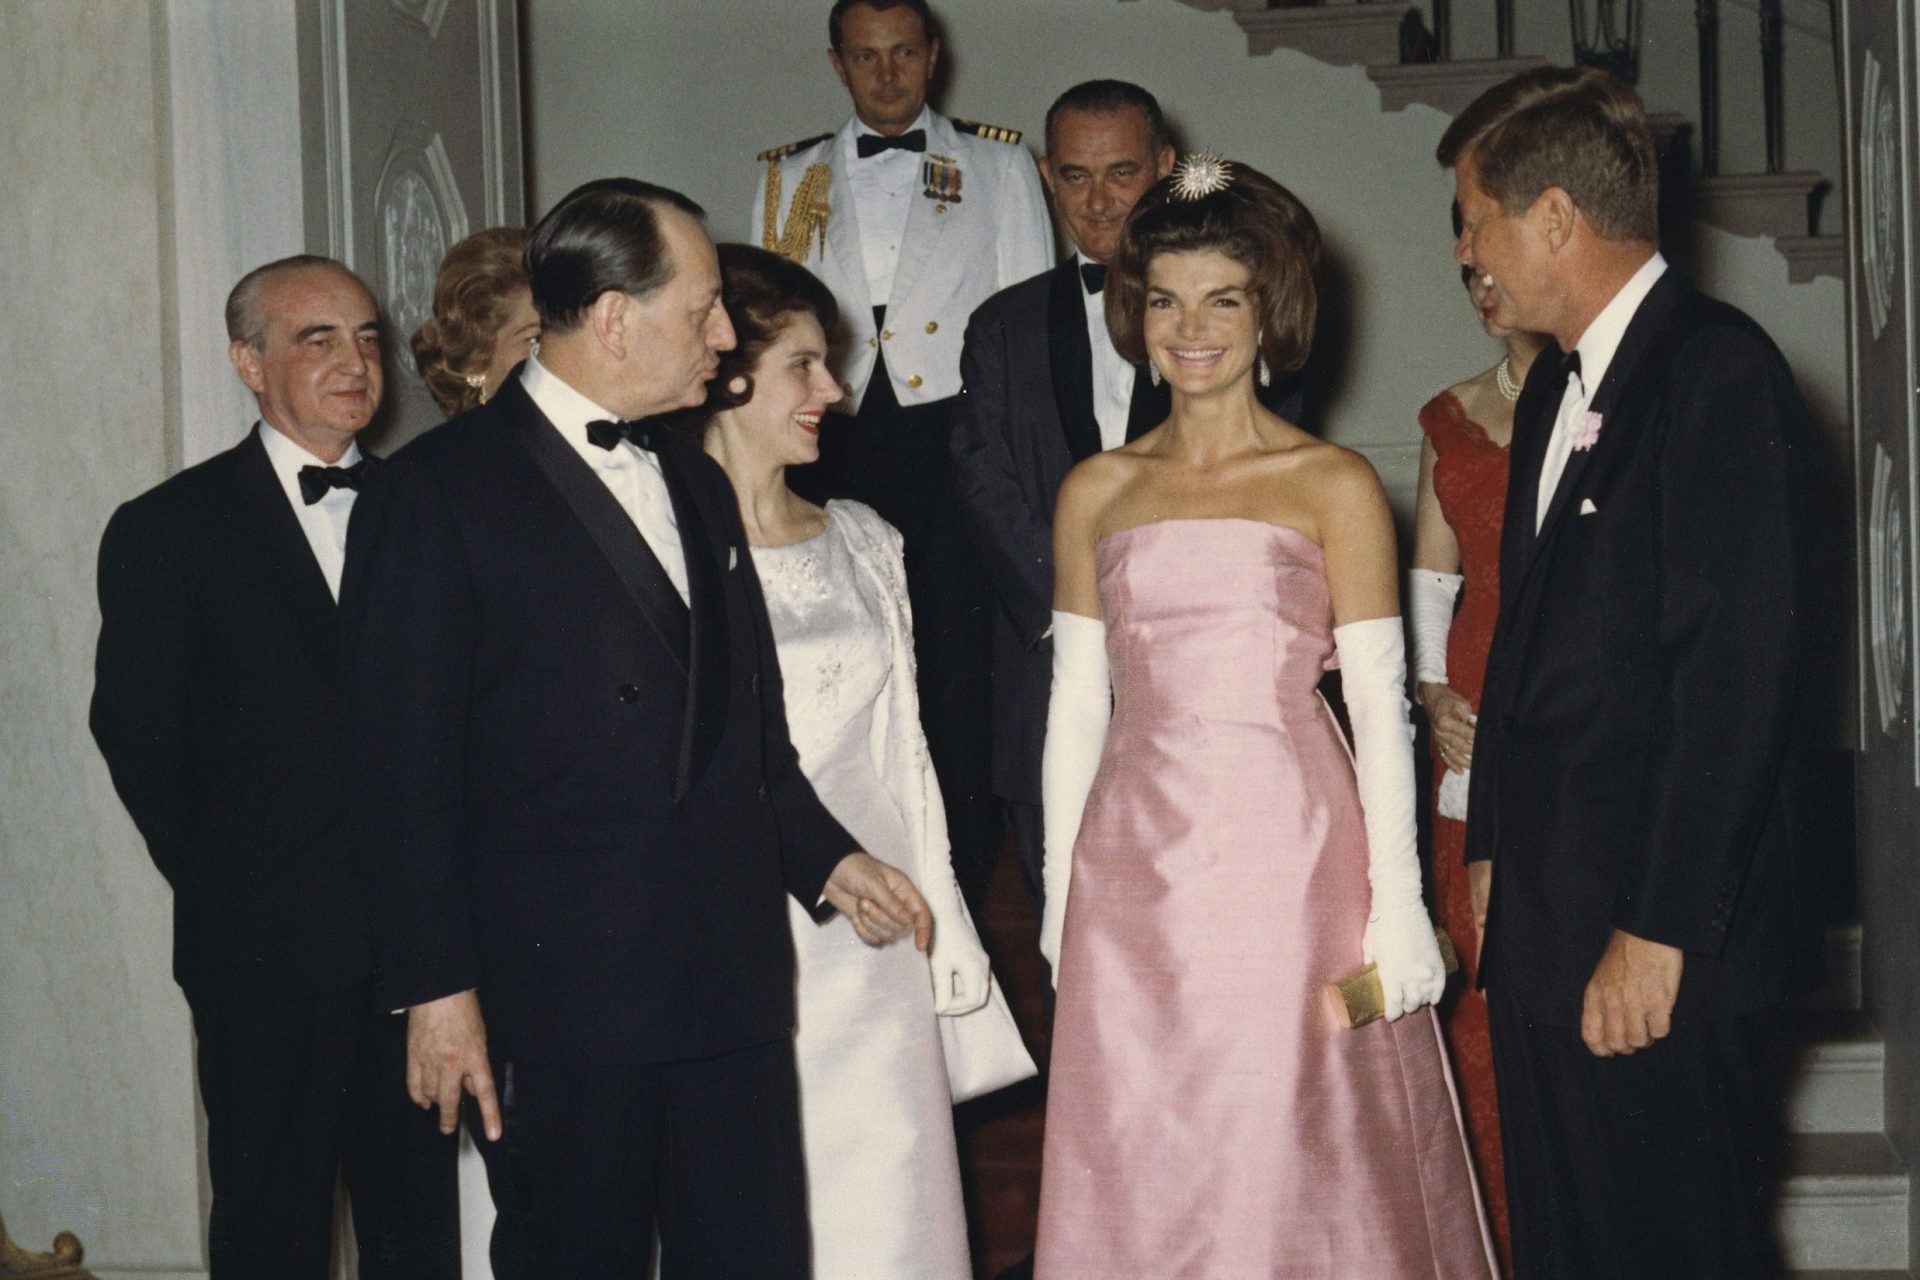 The life of Jackie Kennedy, First Lady and icon of high society